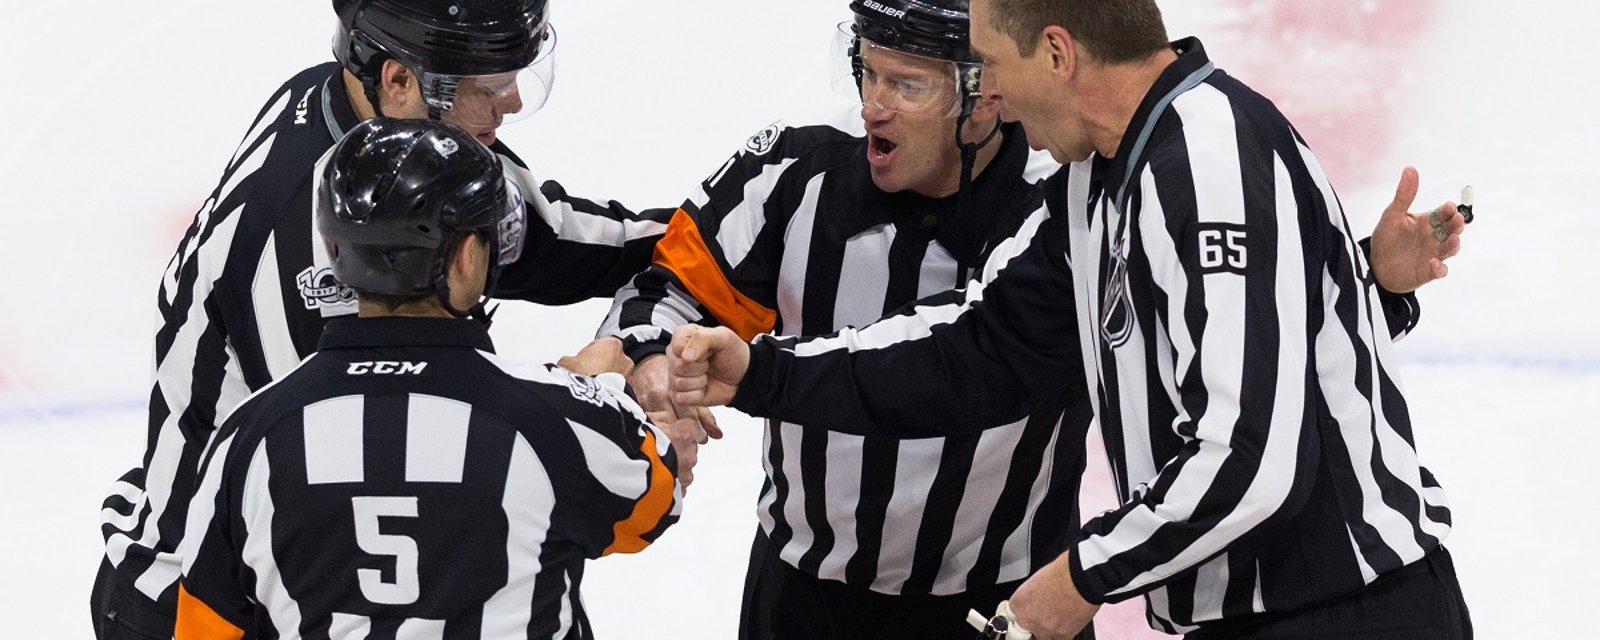 NHL changes the officials for the Leafs/Blue Jackets game.